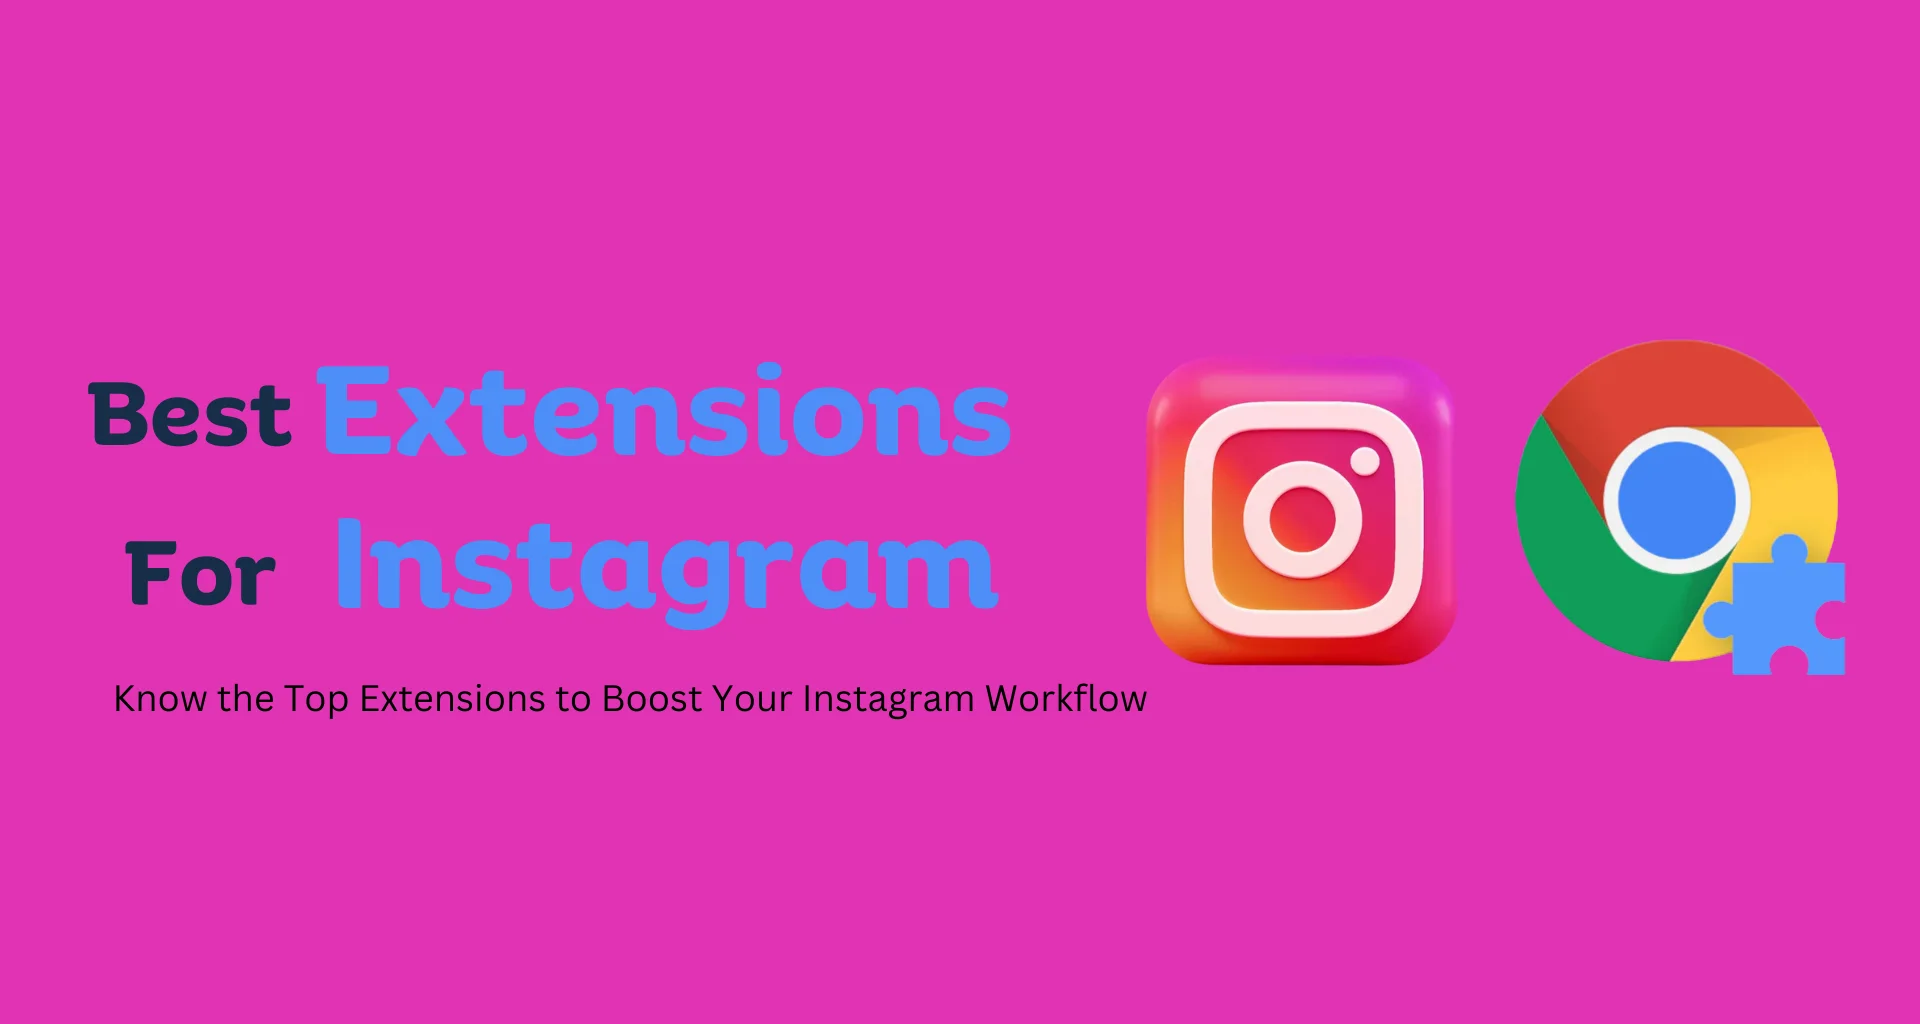 Top Extensions to Boost Your Instagram Workflow